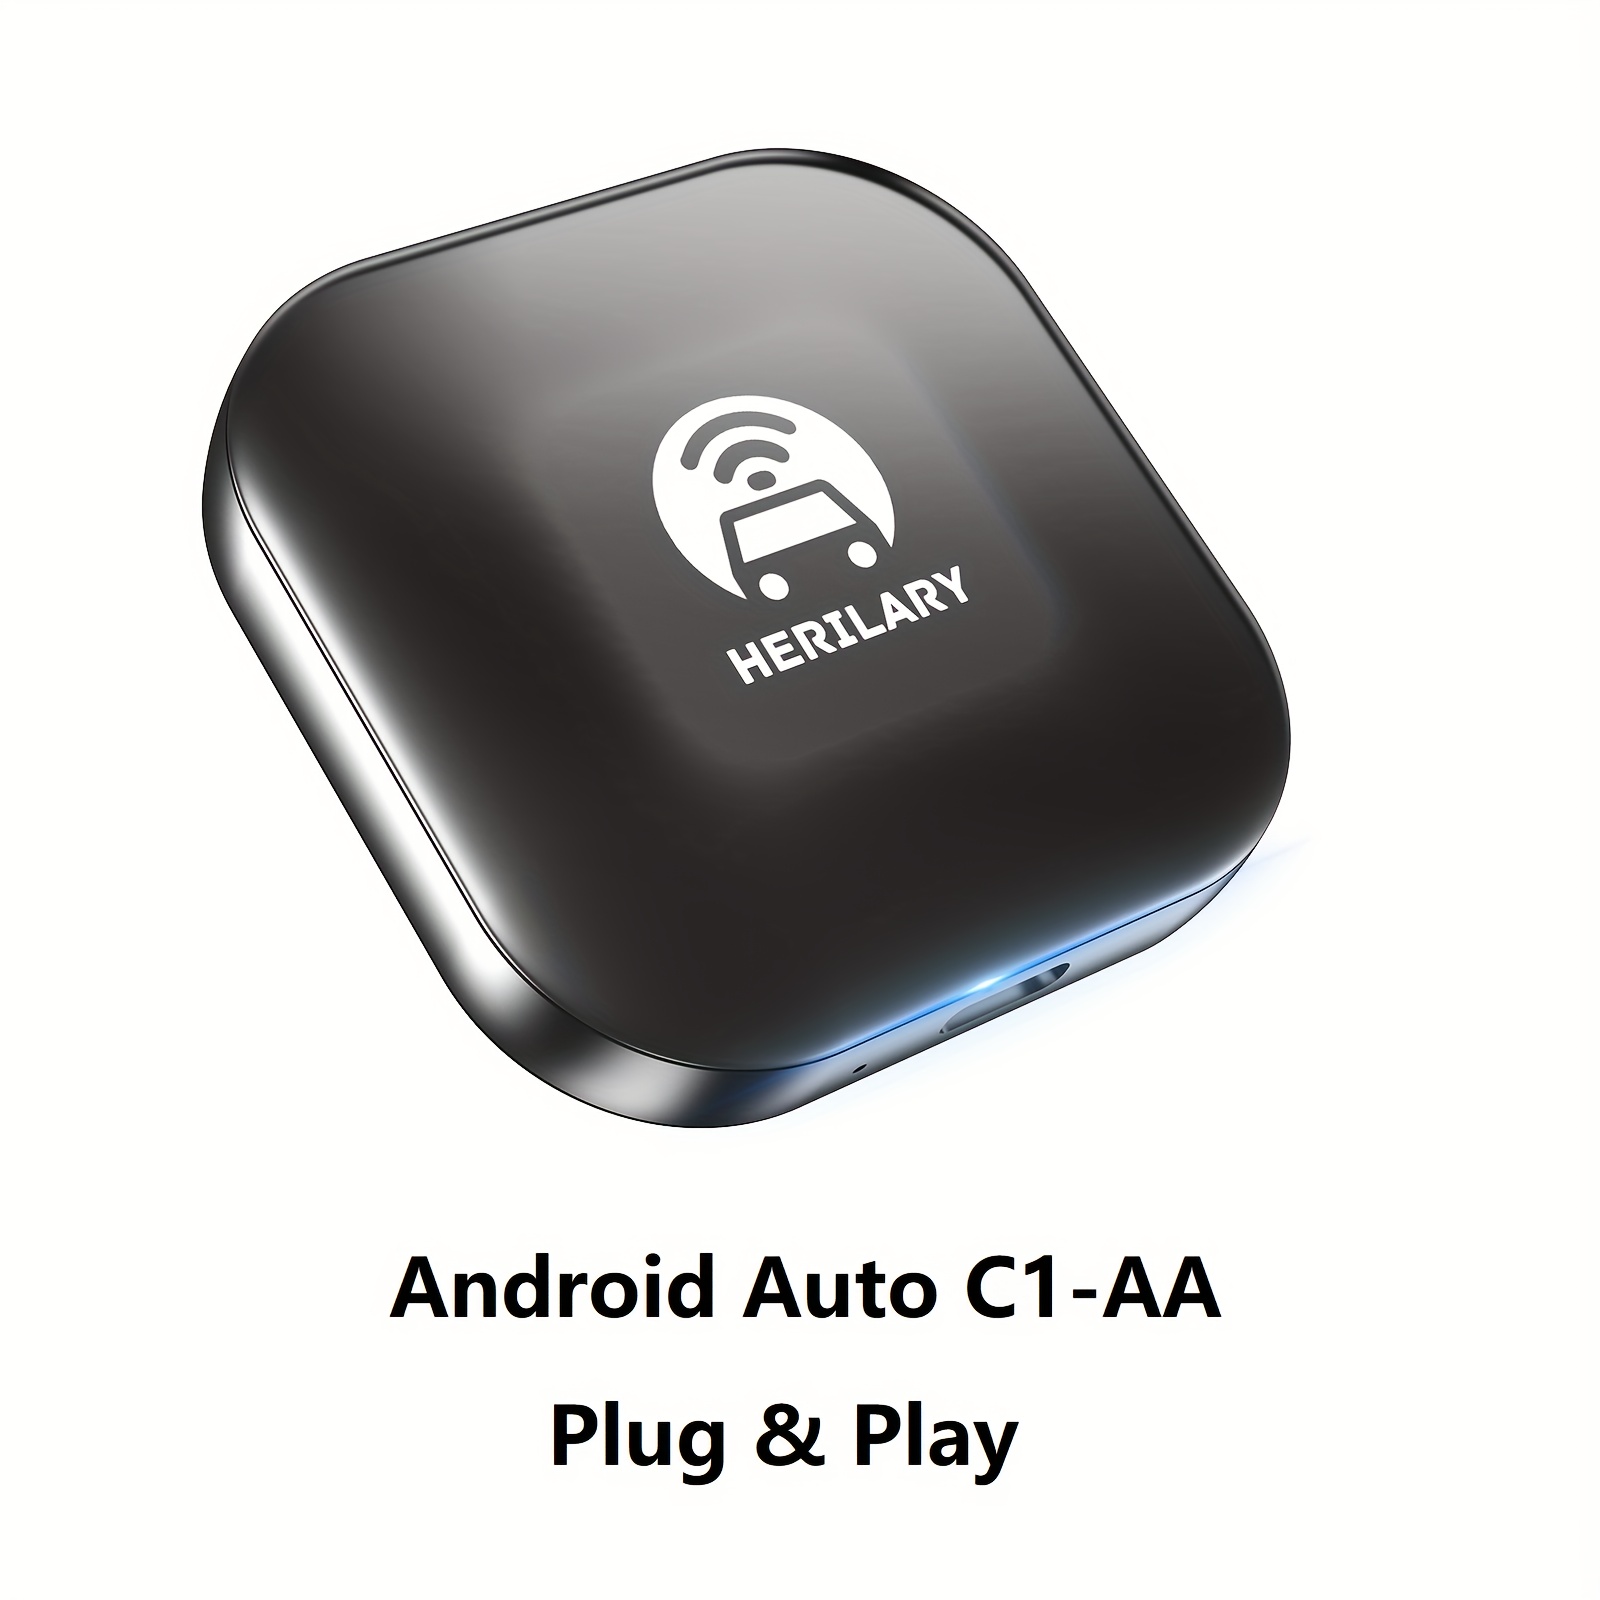 Wireless Android Auto Adapter/Dongle for OEM Factory Wired Android